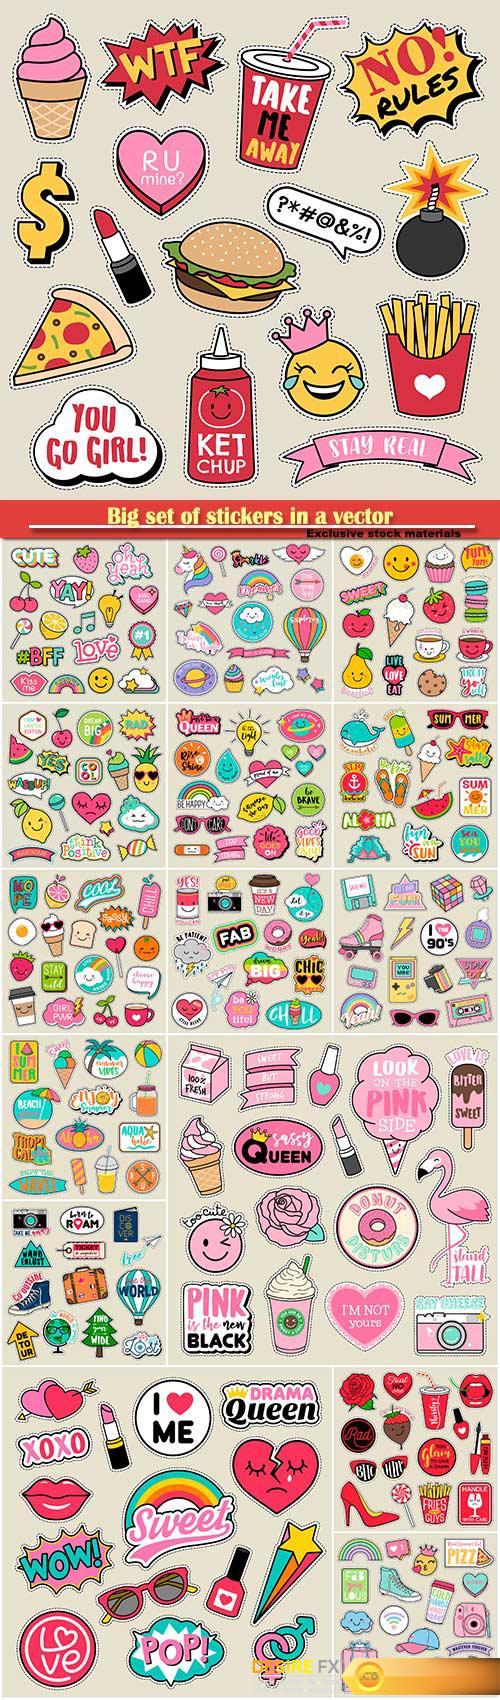 Big set of stickers in a vector, food, cosmetics, travel